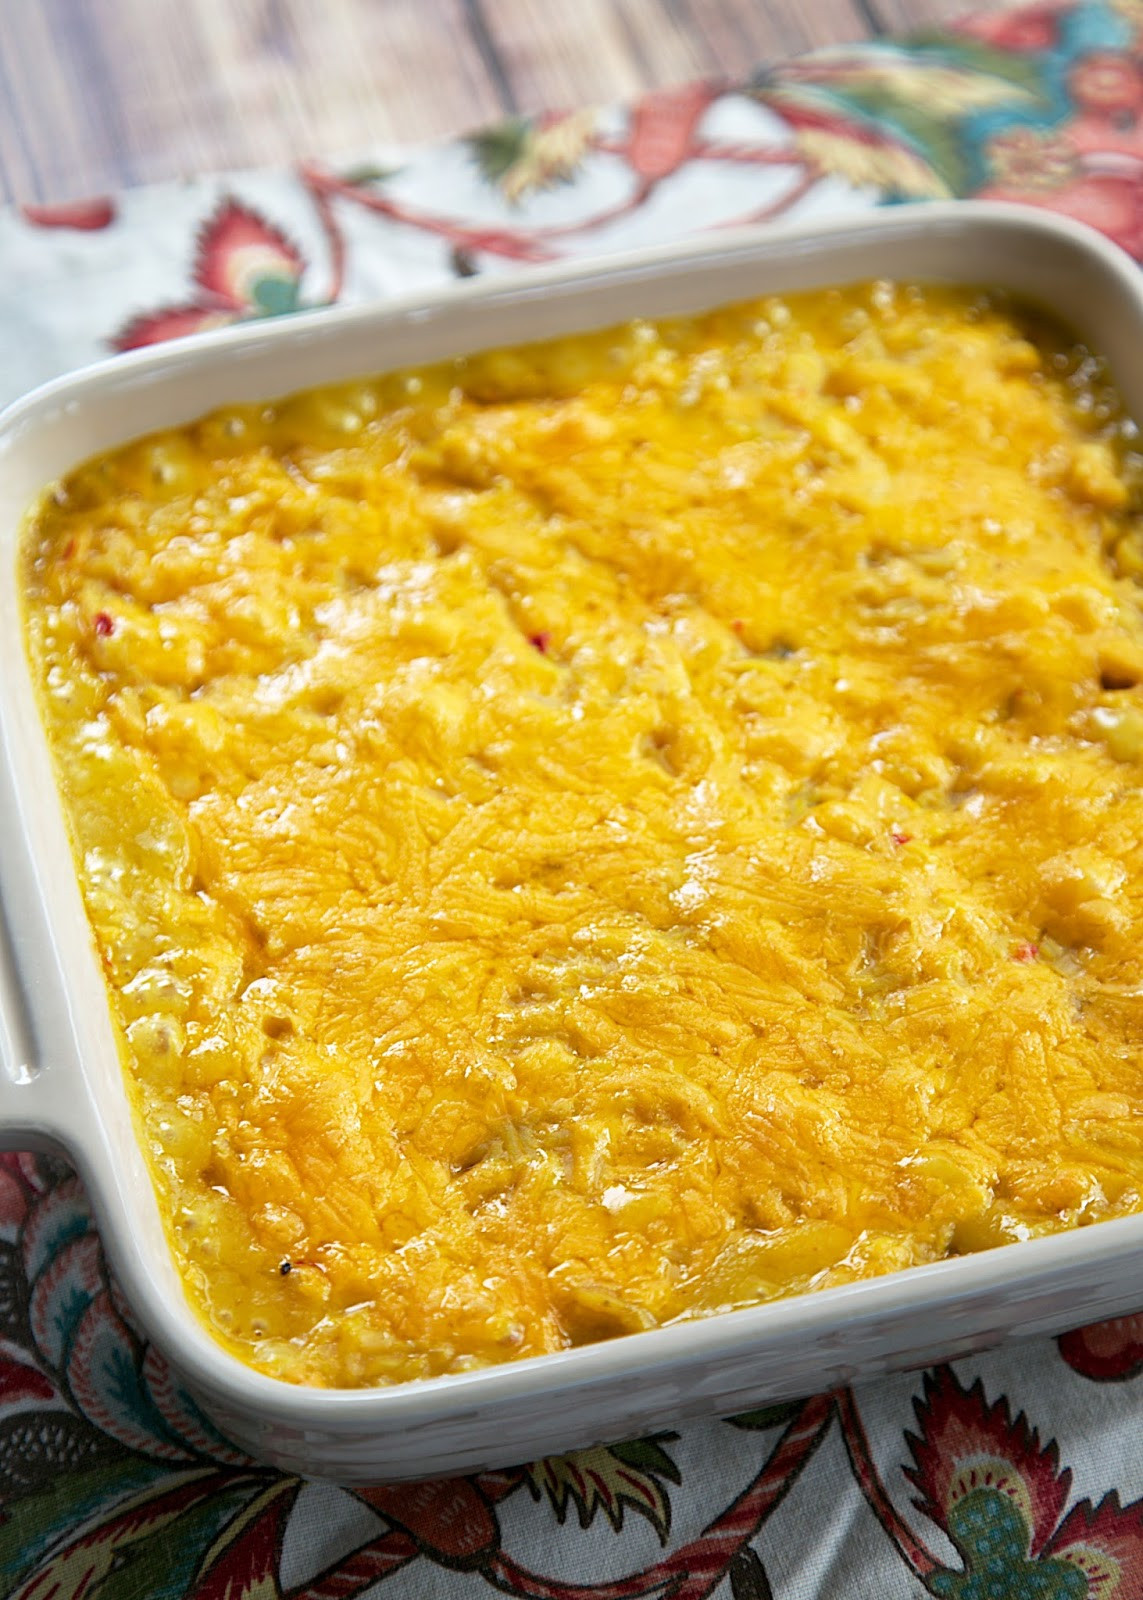 Corn and Rice Casserole Lovely Corn and Rice Casserole Only 4 Ingre Nts Chicken